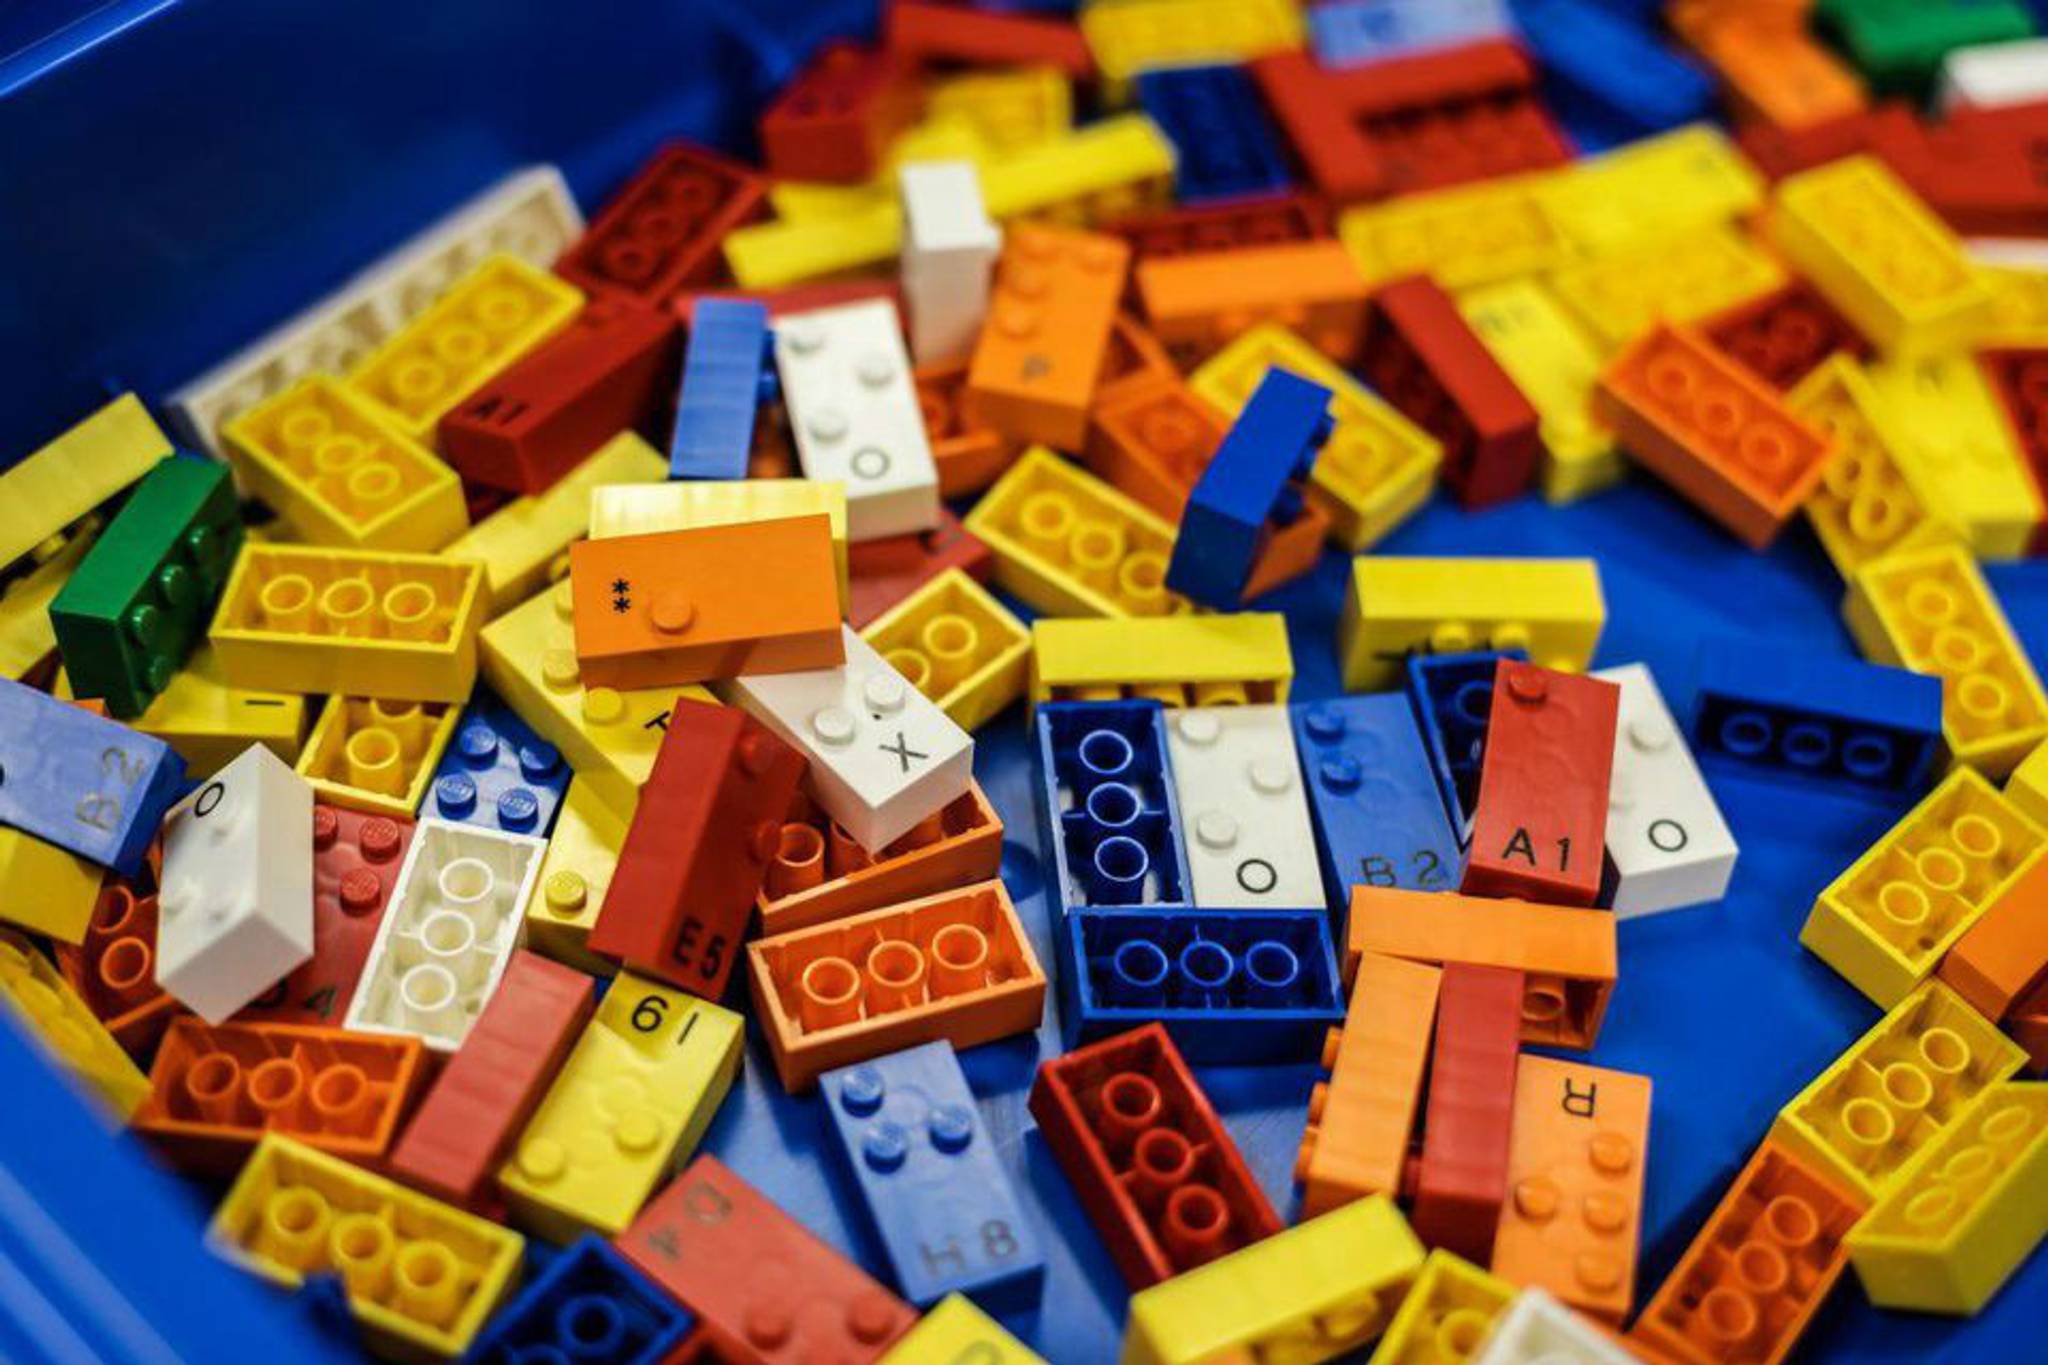 Lego releases bricks to further braille literacy